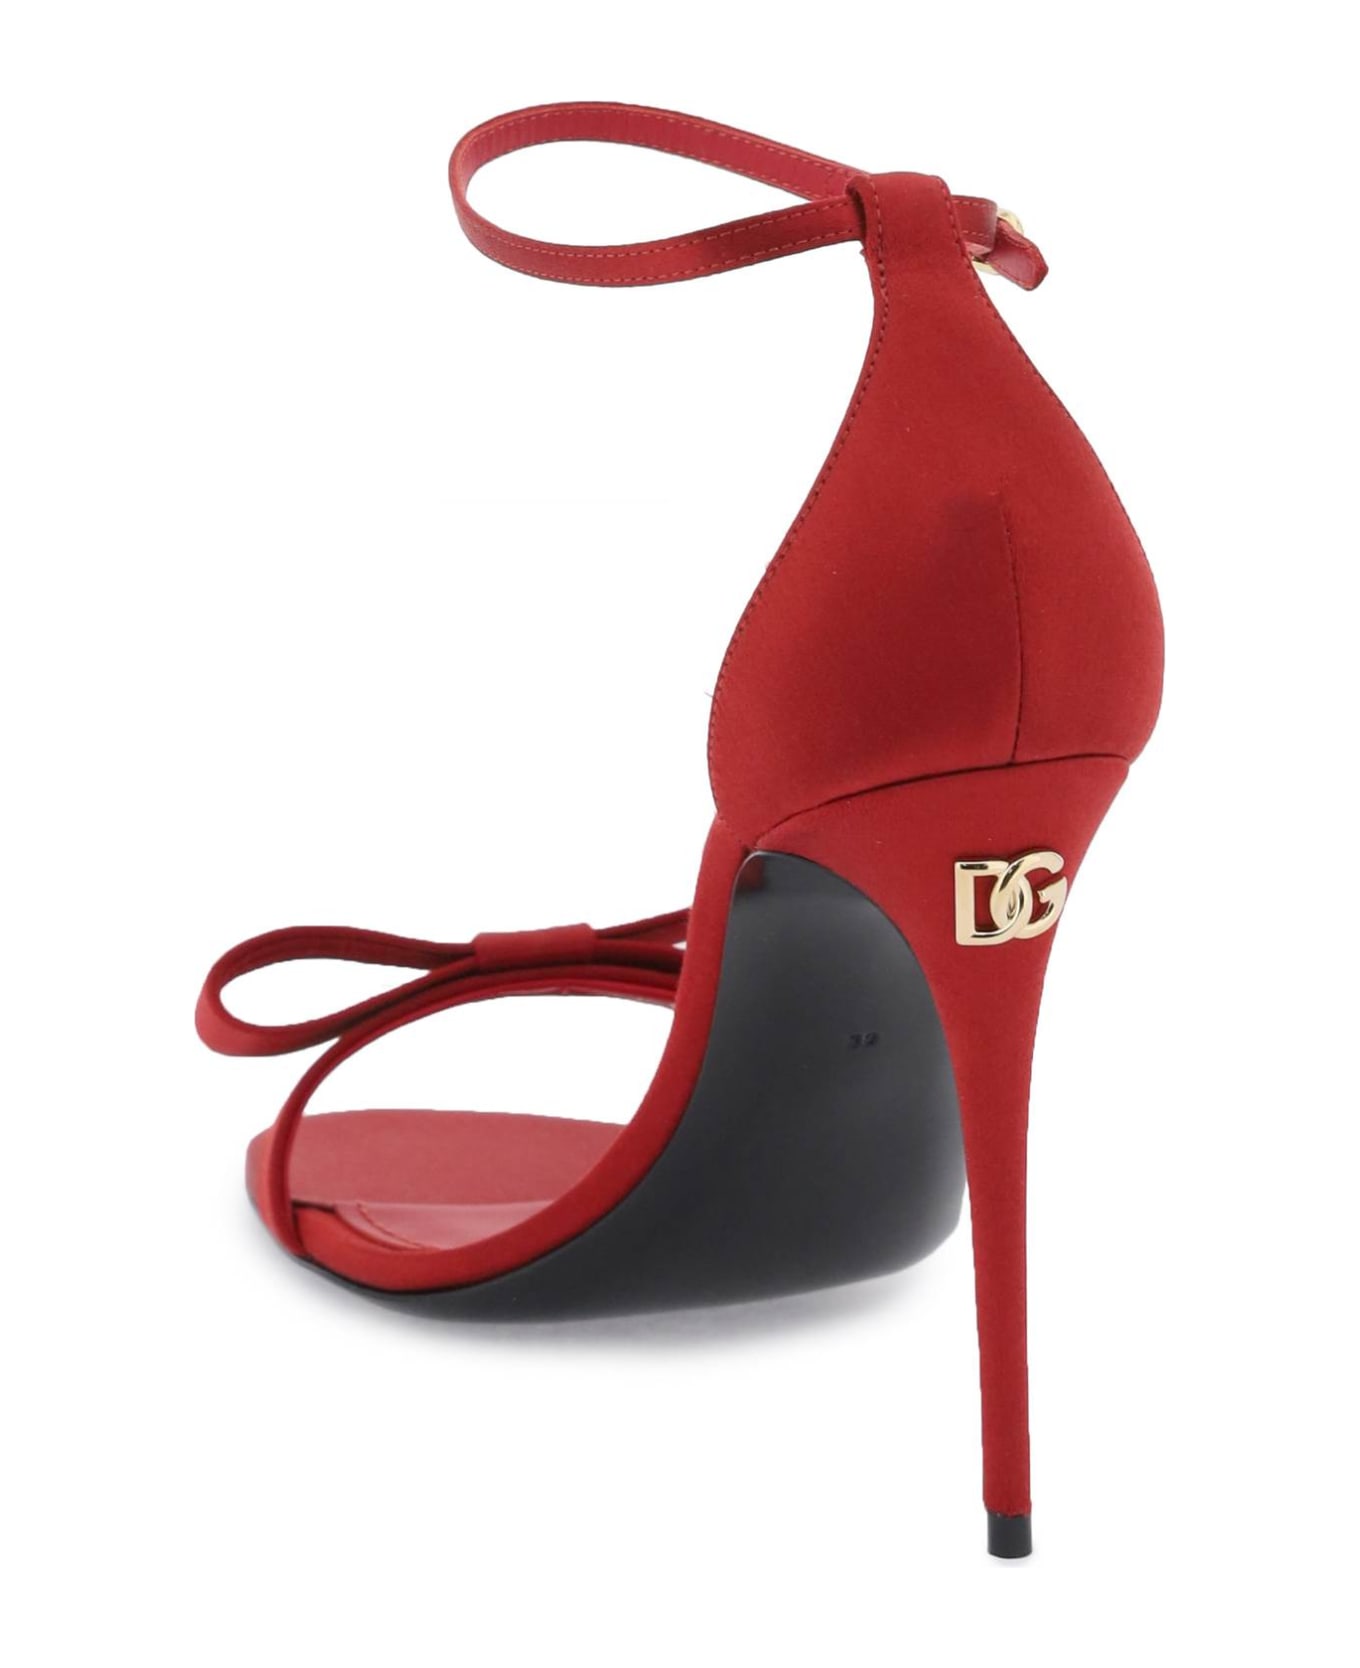 Dolce & Gabbana Satin Sandals - ROSSO SCURO 1 (Red)